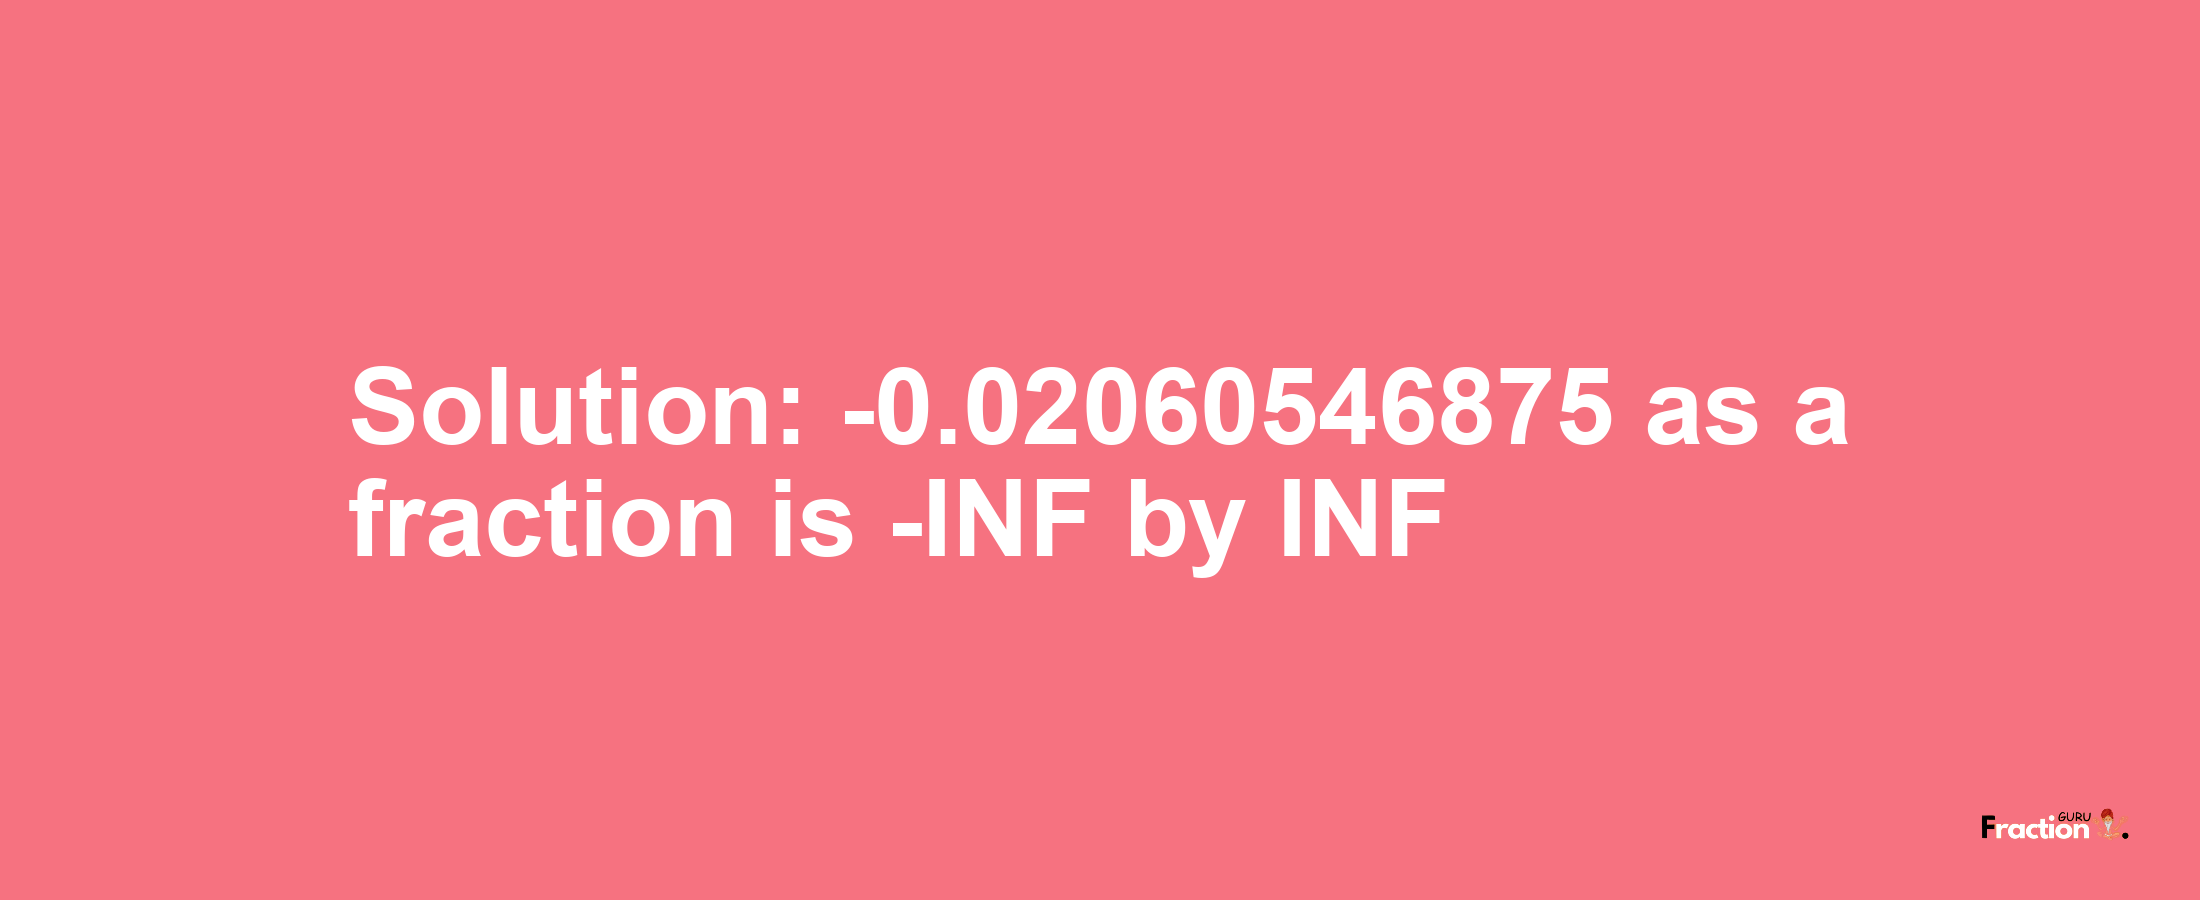 Solution:-0.02060546875 as a fraction is -INF/INF